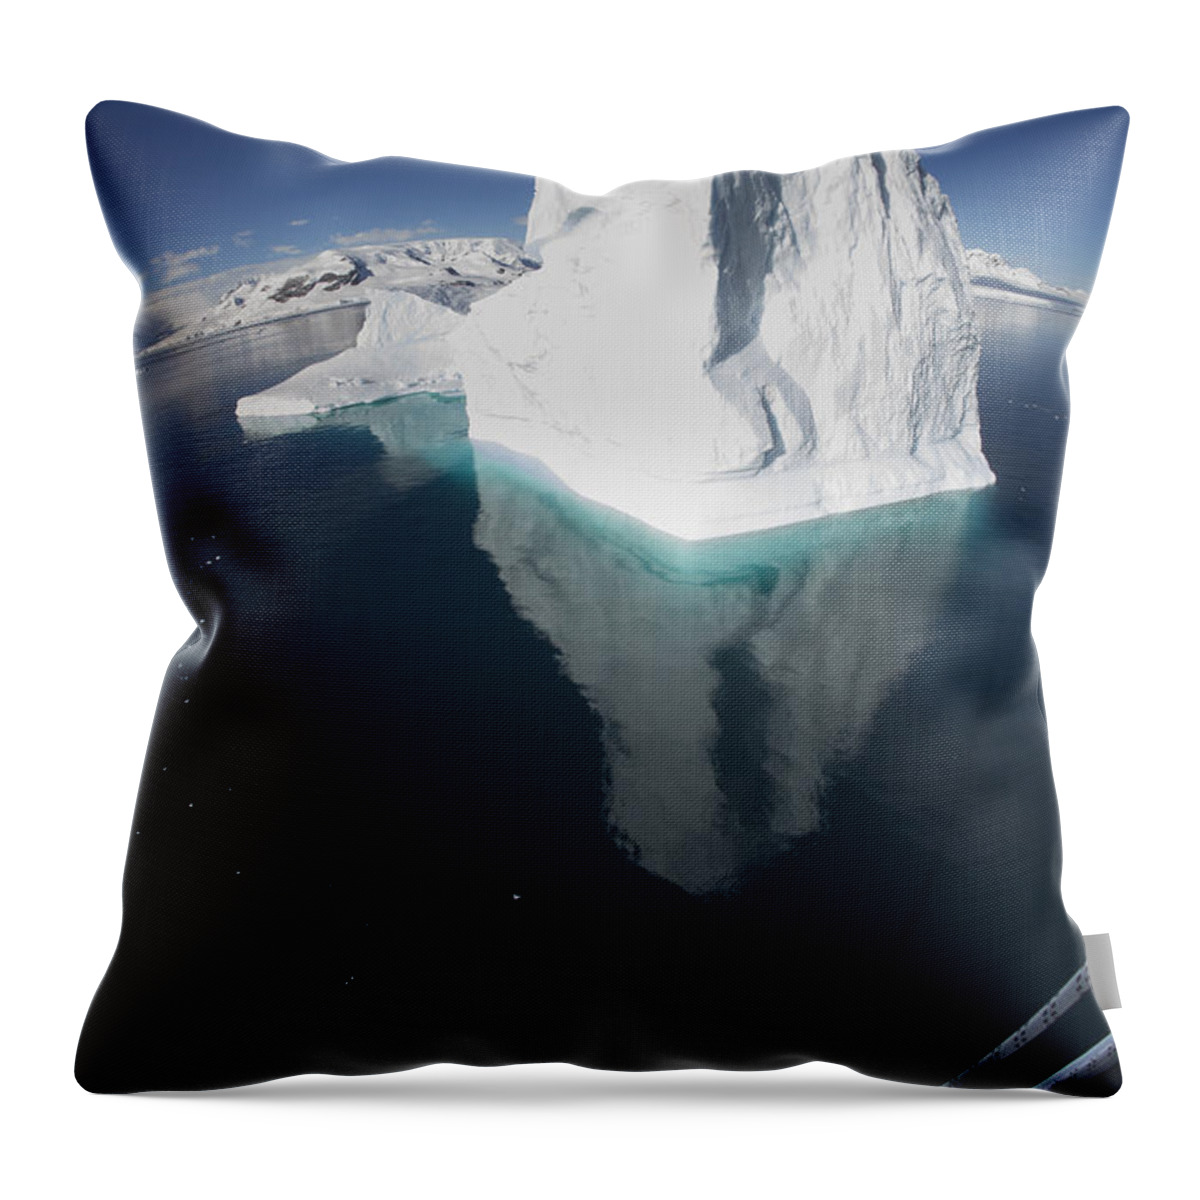 Feb0514 Throw Pillow featuring the photograph Giant Iceberg From The Crows Nest by Matthias Breiter